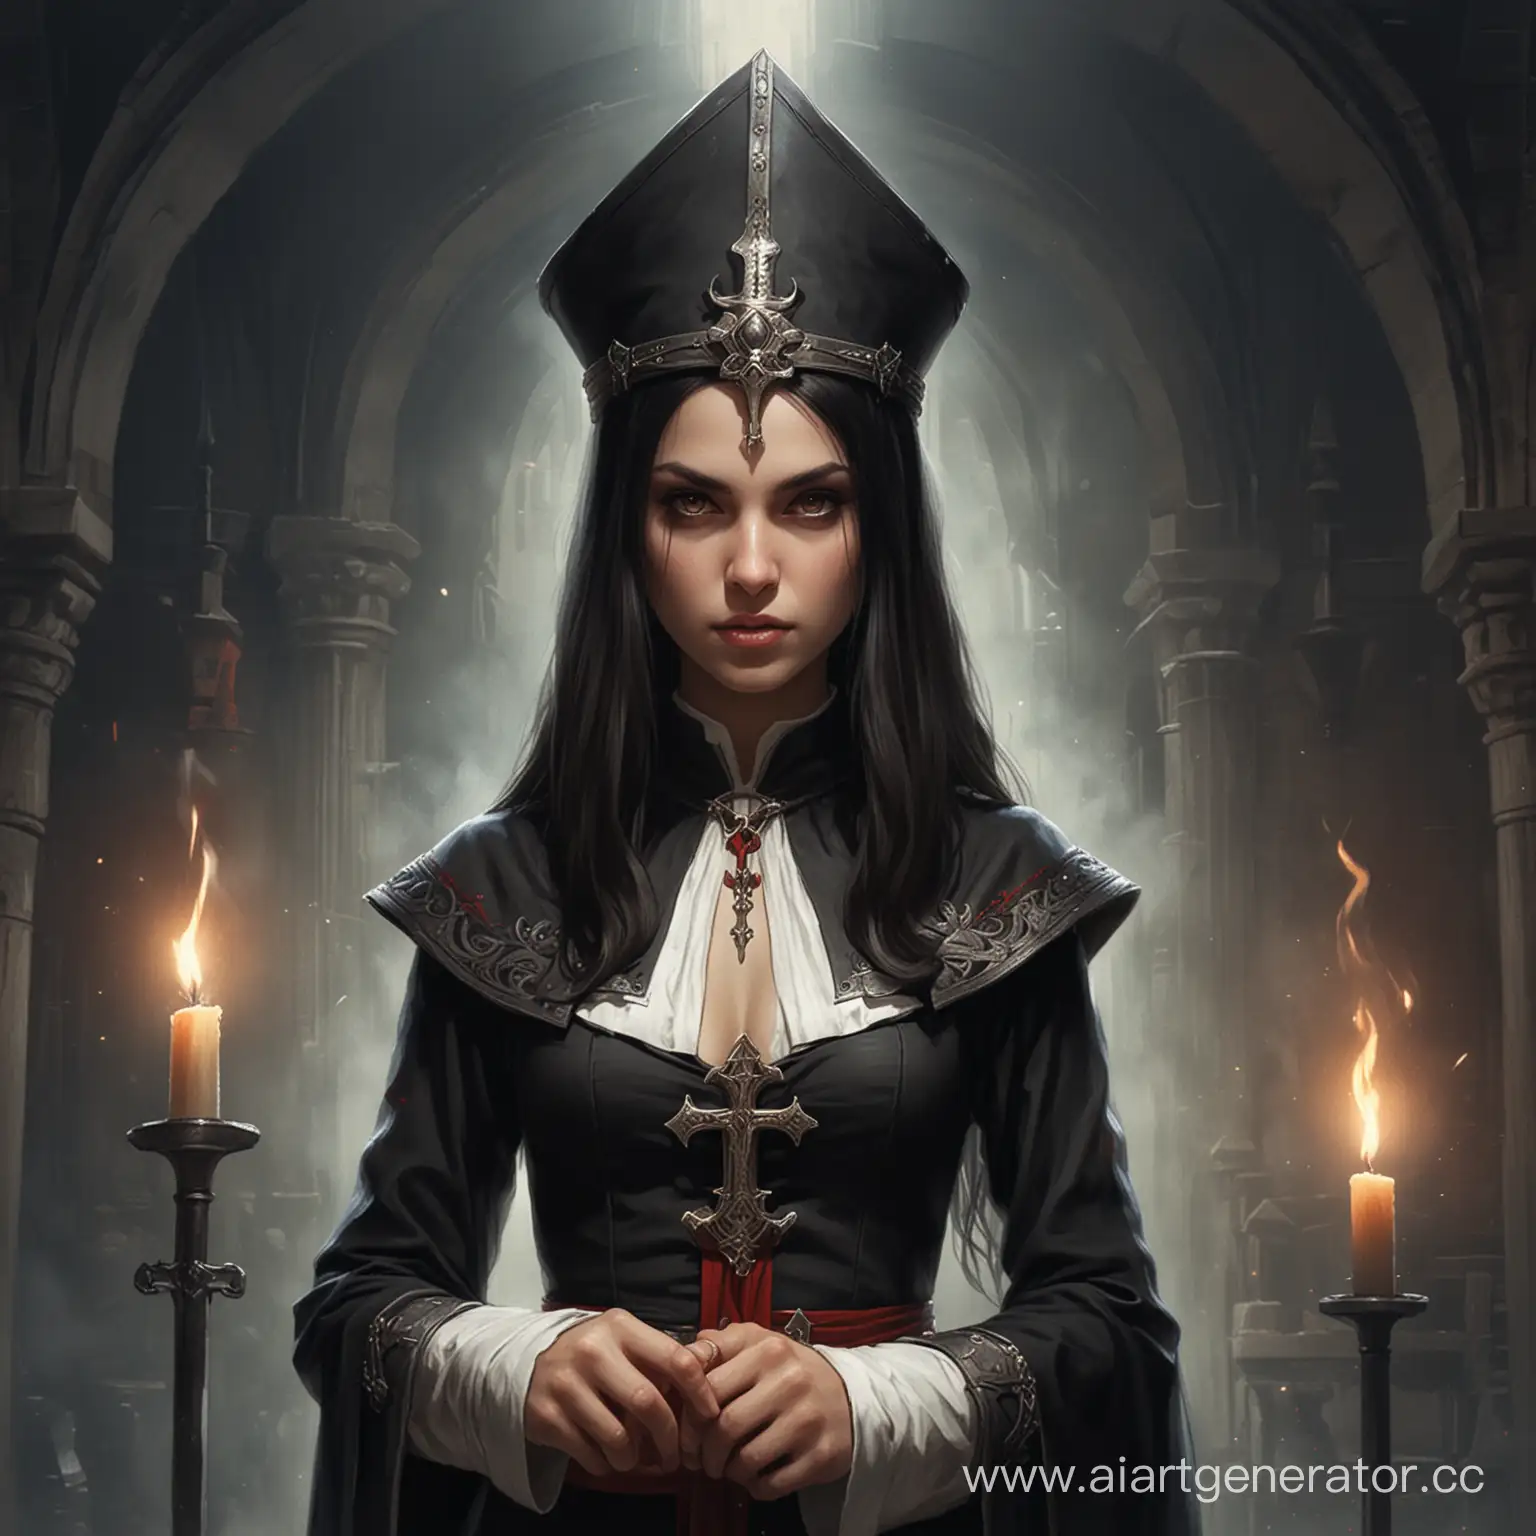 Mysterious-Inquisition-Girl-in-Dark-Gothic-Setting